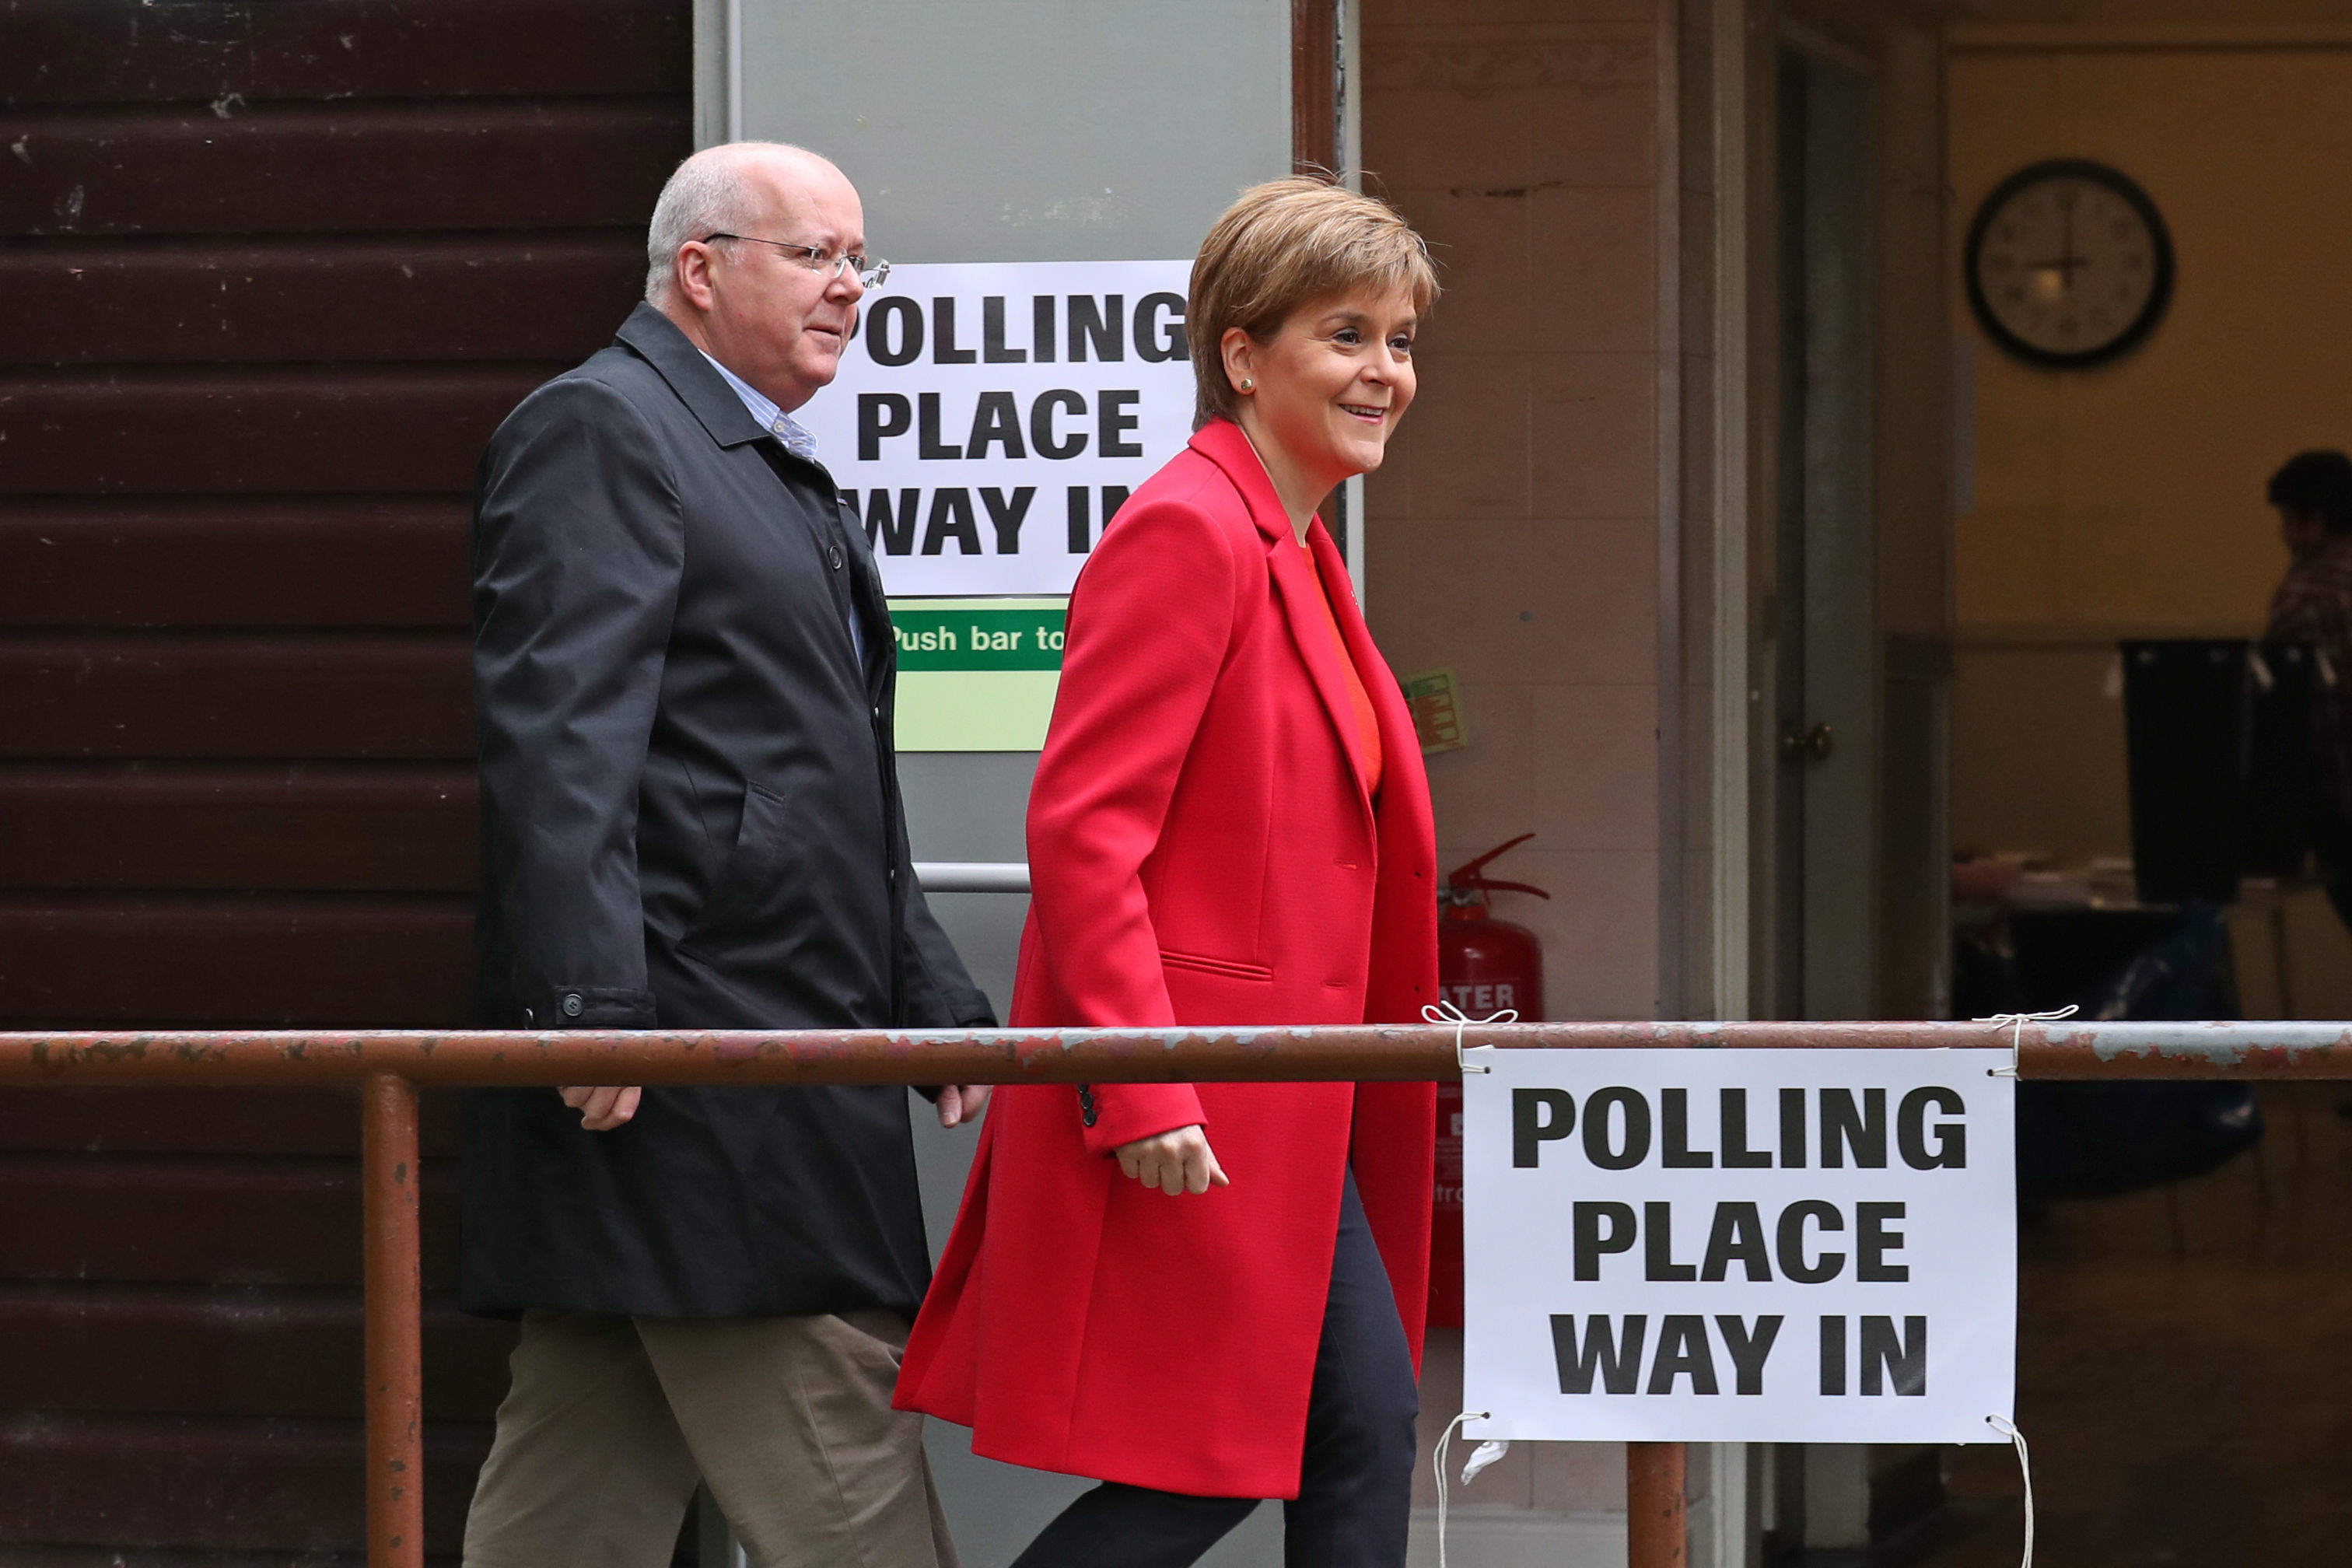 SNP leader Nicola Sturgeon and chief executive of the SNP Peter Murrell arrive at a polling station at Broomhouse Park Community Hall in Edinburgh to cast their votes for the European Parliament elections.